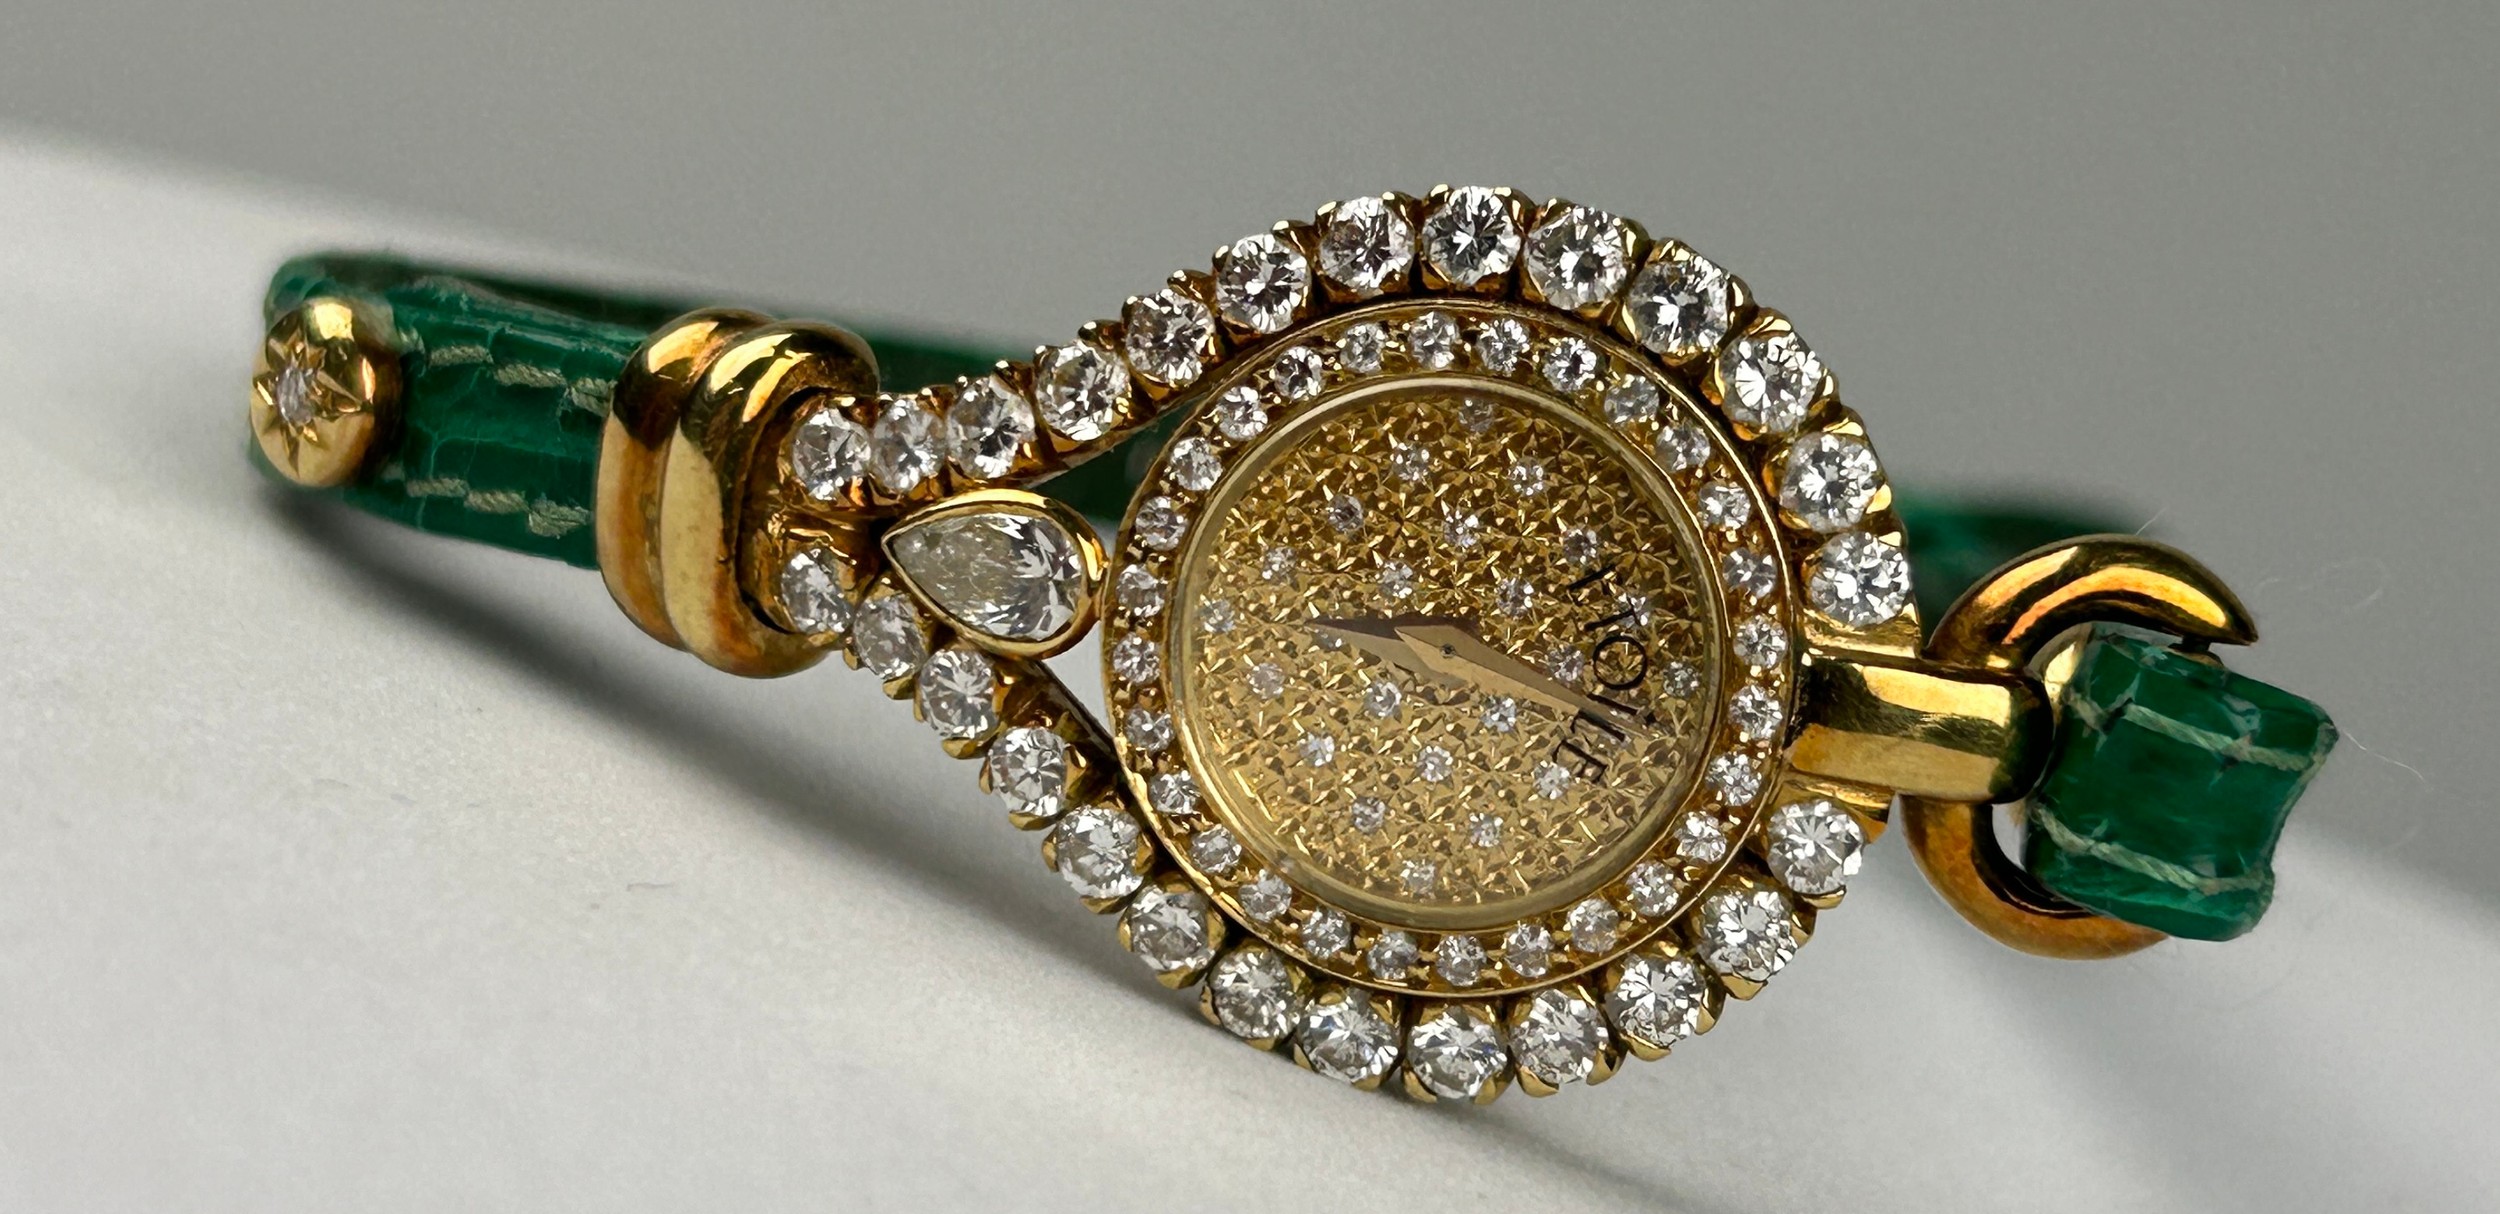 A DIAMOND ETOILE WATCH APPROXIMATELY THREE CARATS IN 14CT GOLD WITH GREEN LEATHER STRAP, - Image 2 of 5